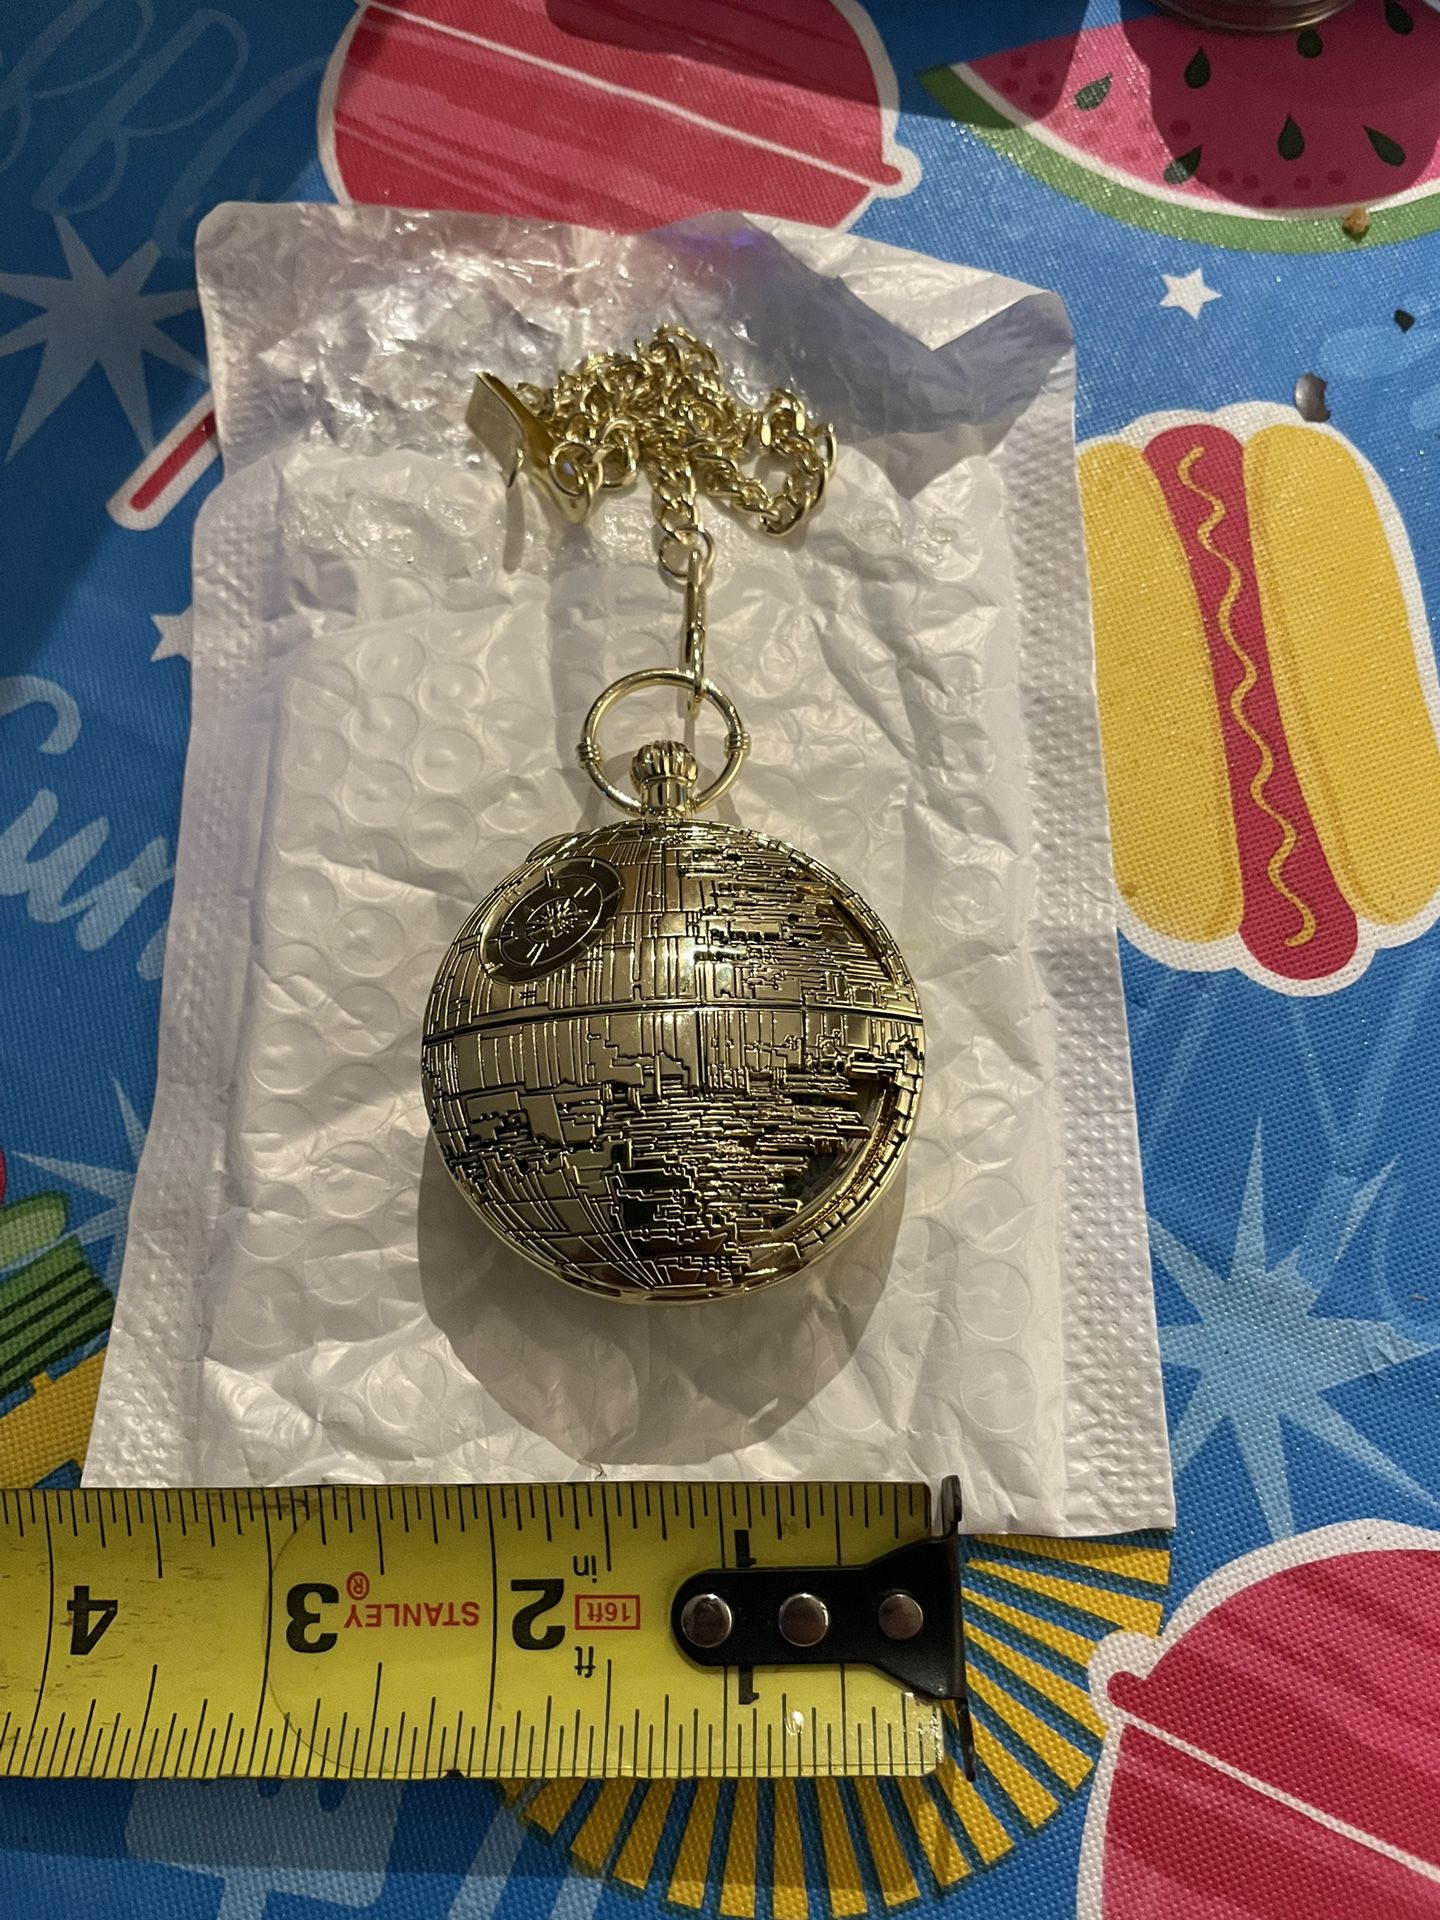 Death star pocket watch with music pretty cool for any collectors $40 in n Lakeland 